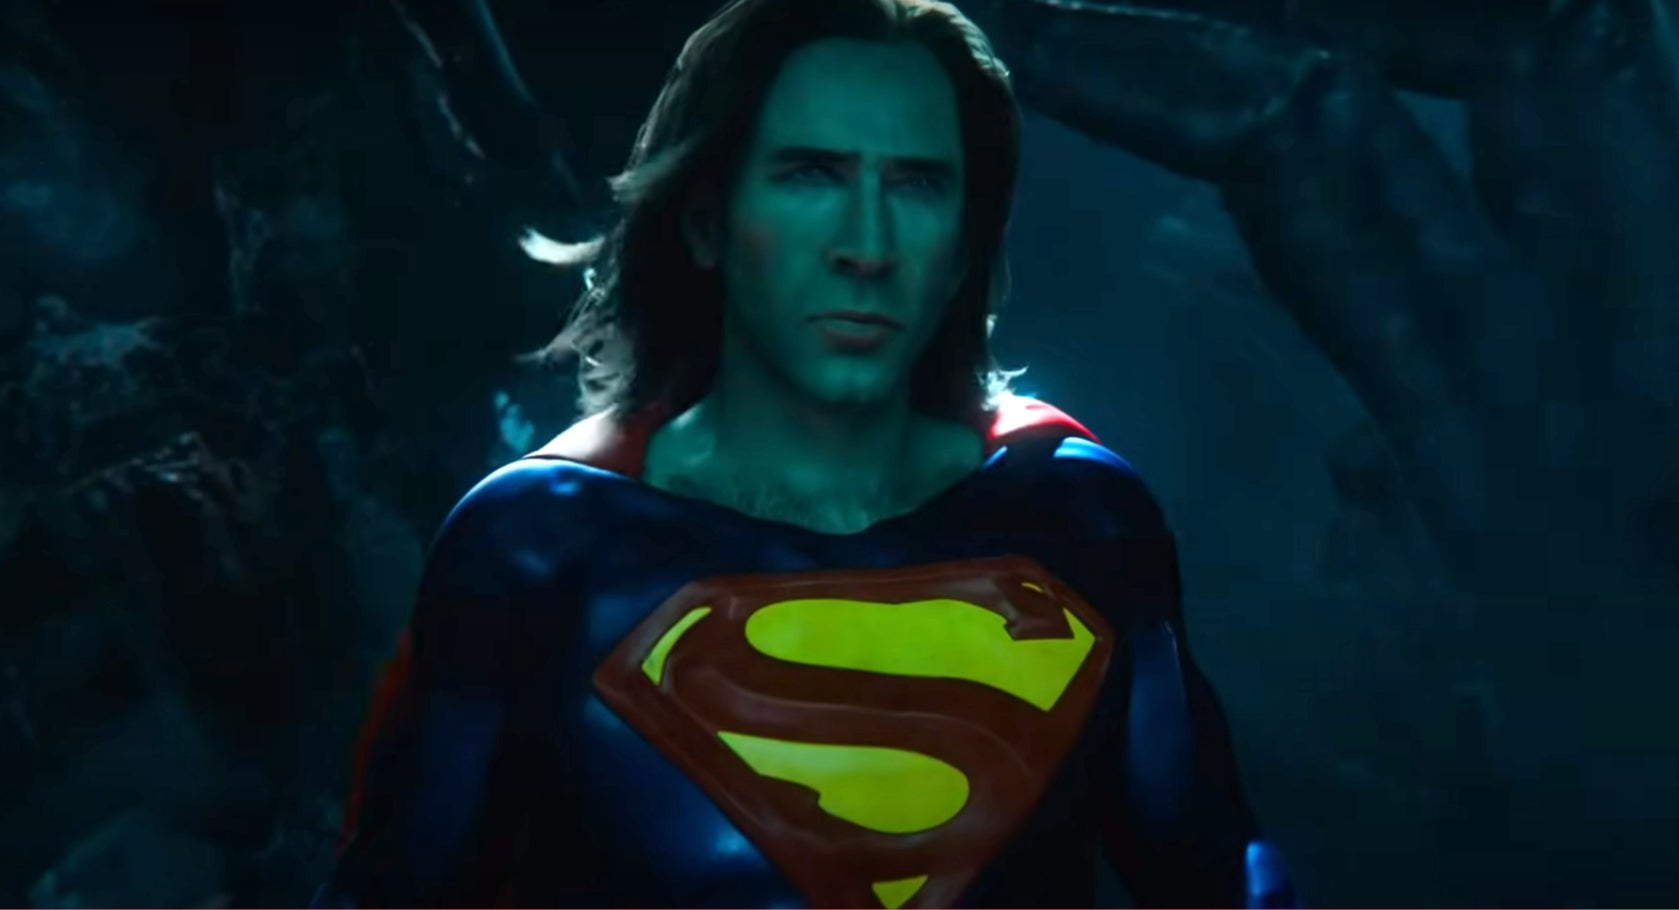 Cage appeared as his character from ‘Superman Lives’, the cancelled Nineties film, in ‘The Flash'